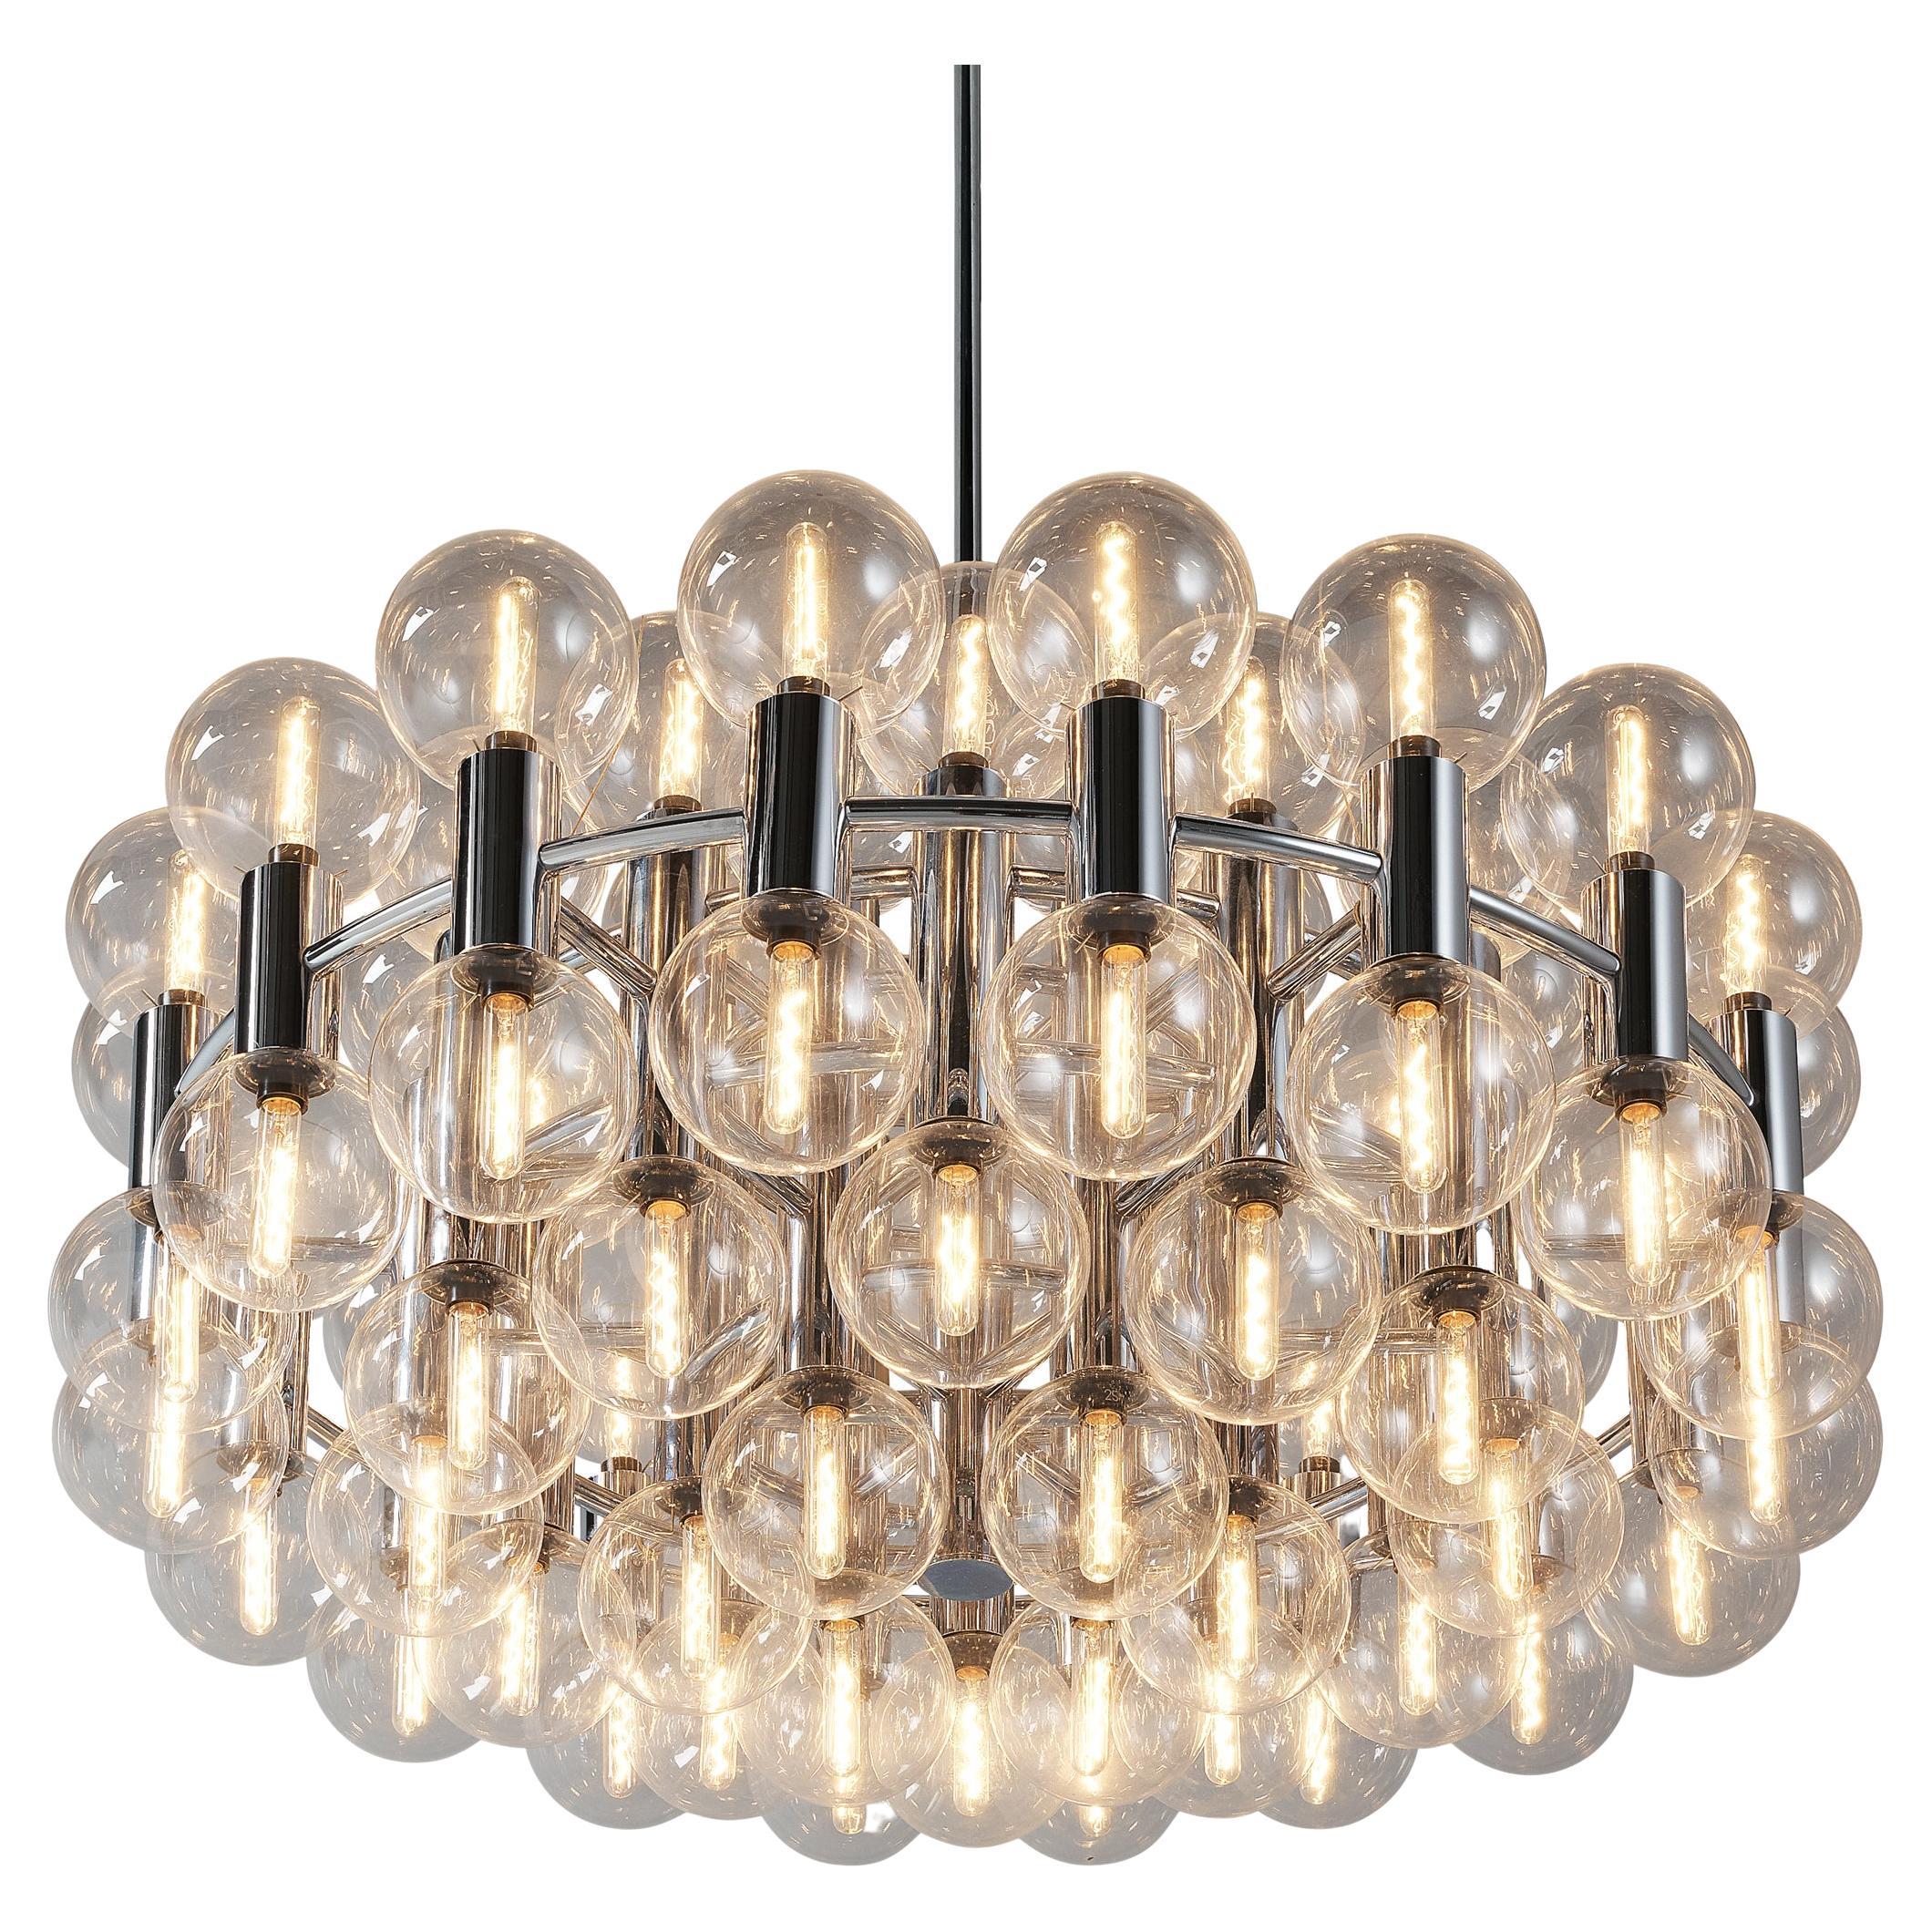  Motoko Ishii for Staff Leuchten Large Chandelier in Chrome with 72 Glass Orbs For Sale